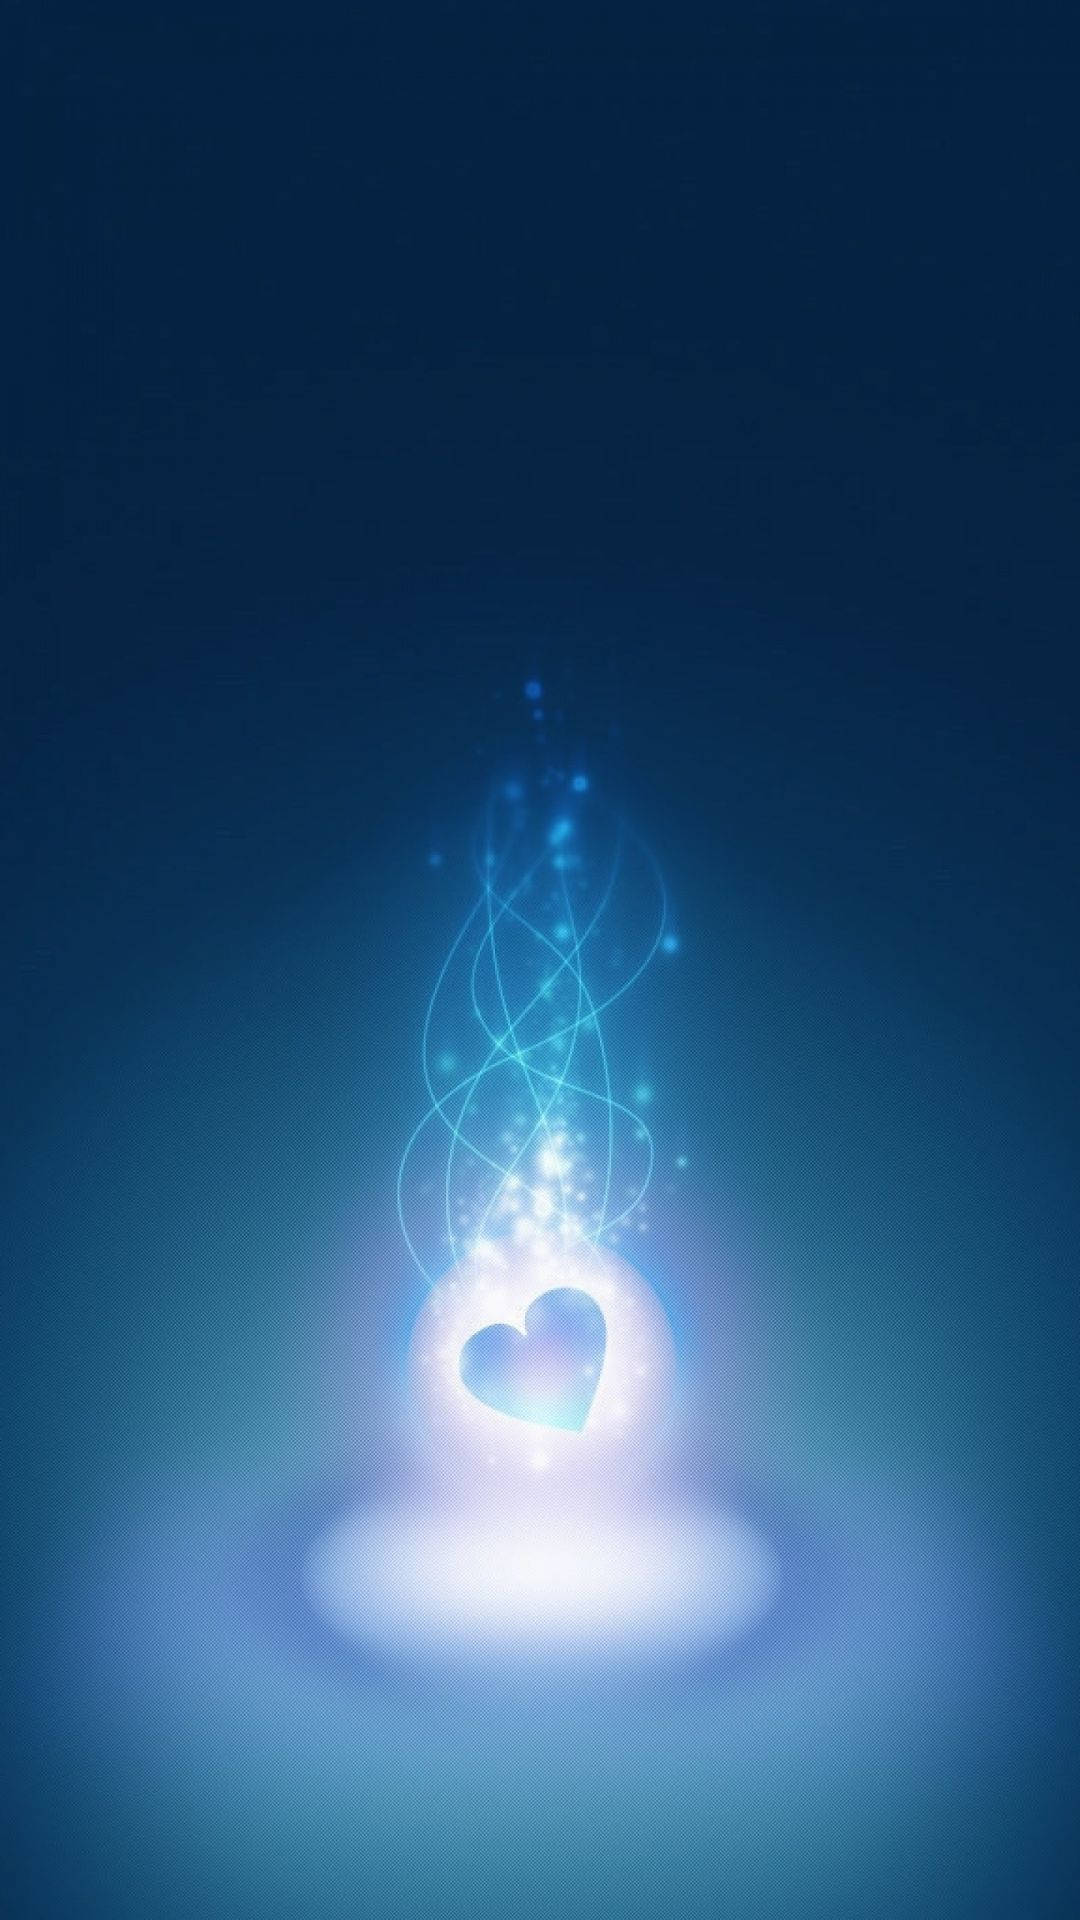 Caption: Embrace Love with This Heart-Inspired iPhone Wallpaper Wallpaper